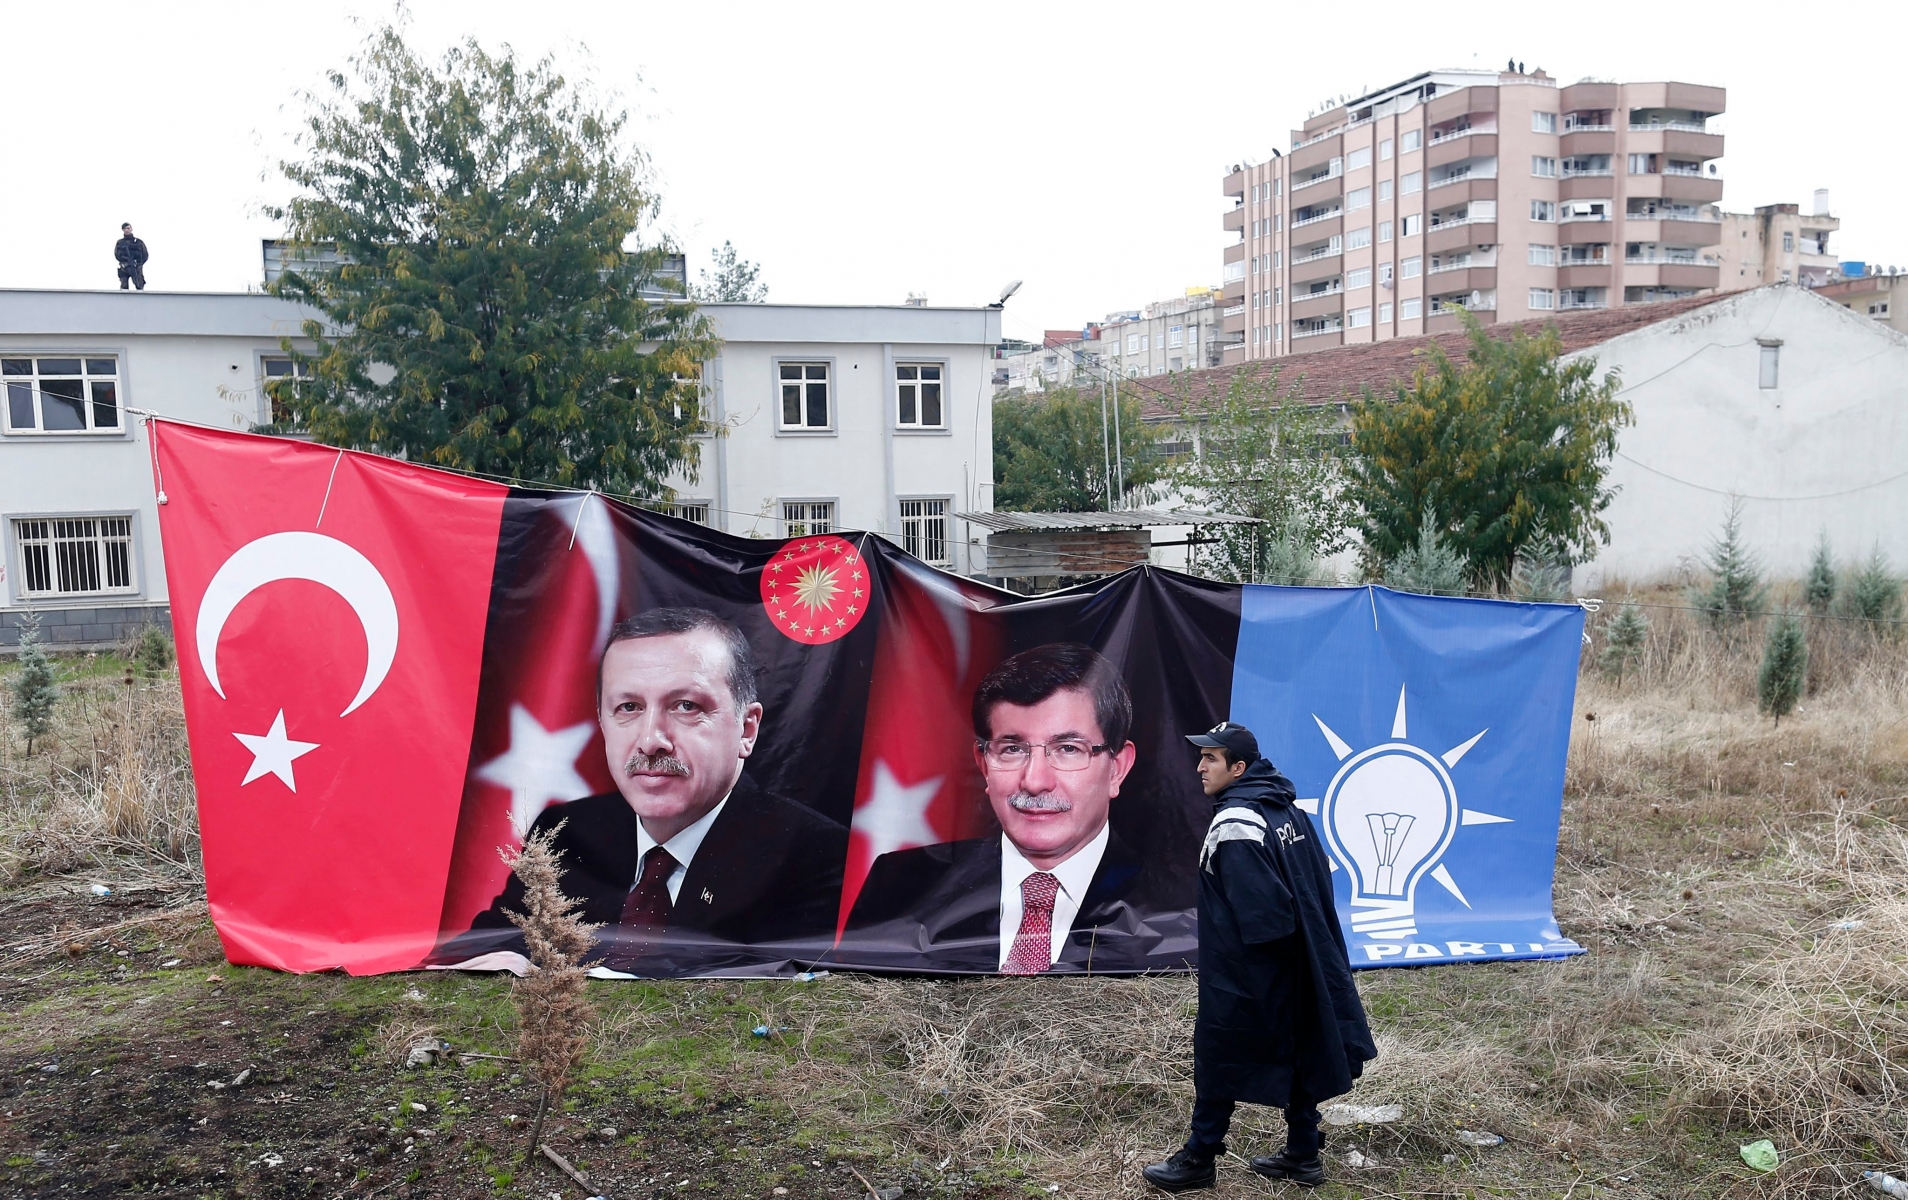 epa05001997 A Turkish police guard front of pictures of the Turkish Prime Minister Ahmet Davutoglu and Turkish President Recep Tayyip Erdogan during an general election rally  in Diyarbakir, Turkey, 29 October 2015. Turkey's general elections will be held on 01 November 2015.  EPA/SEDAT SUNA TURKEY GENERAL ELECTION